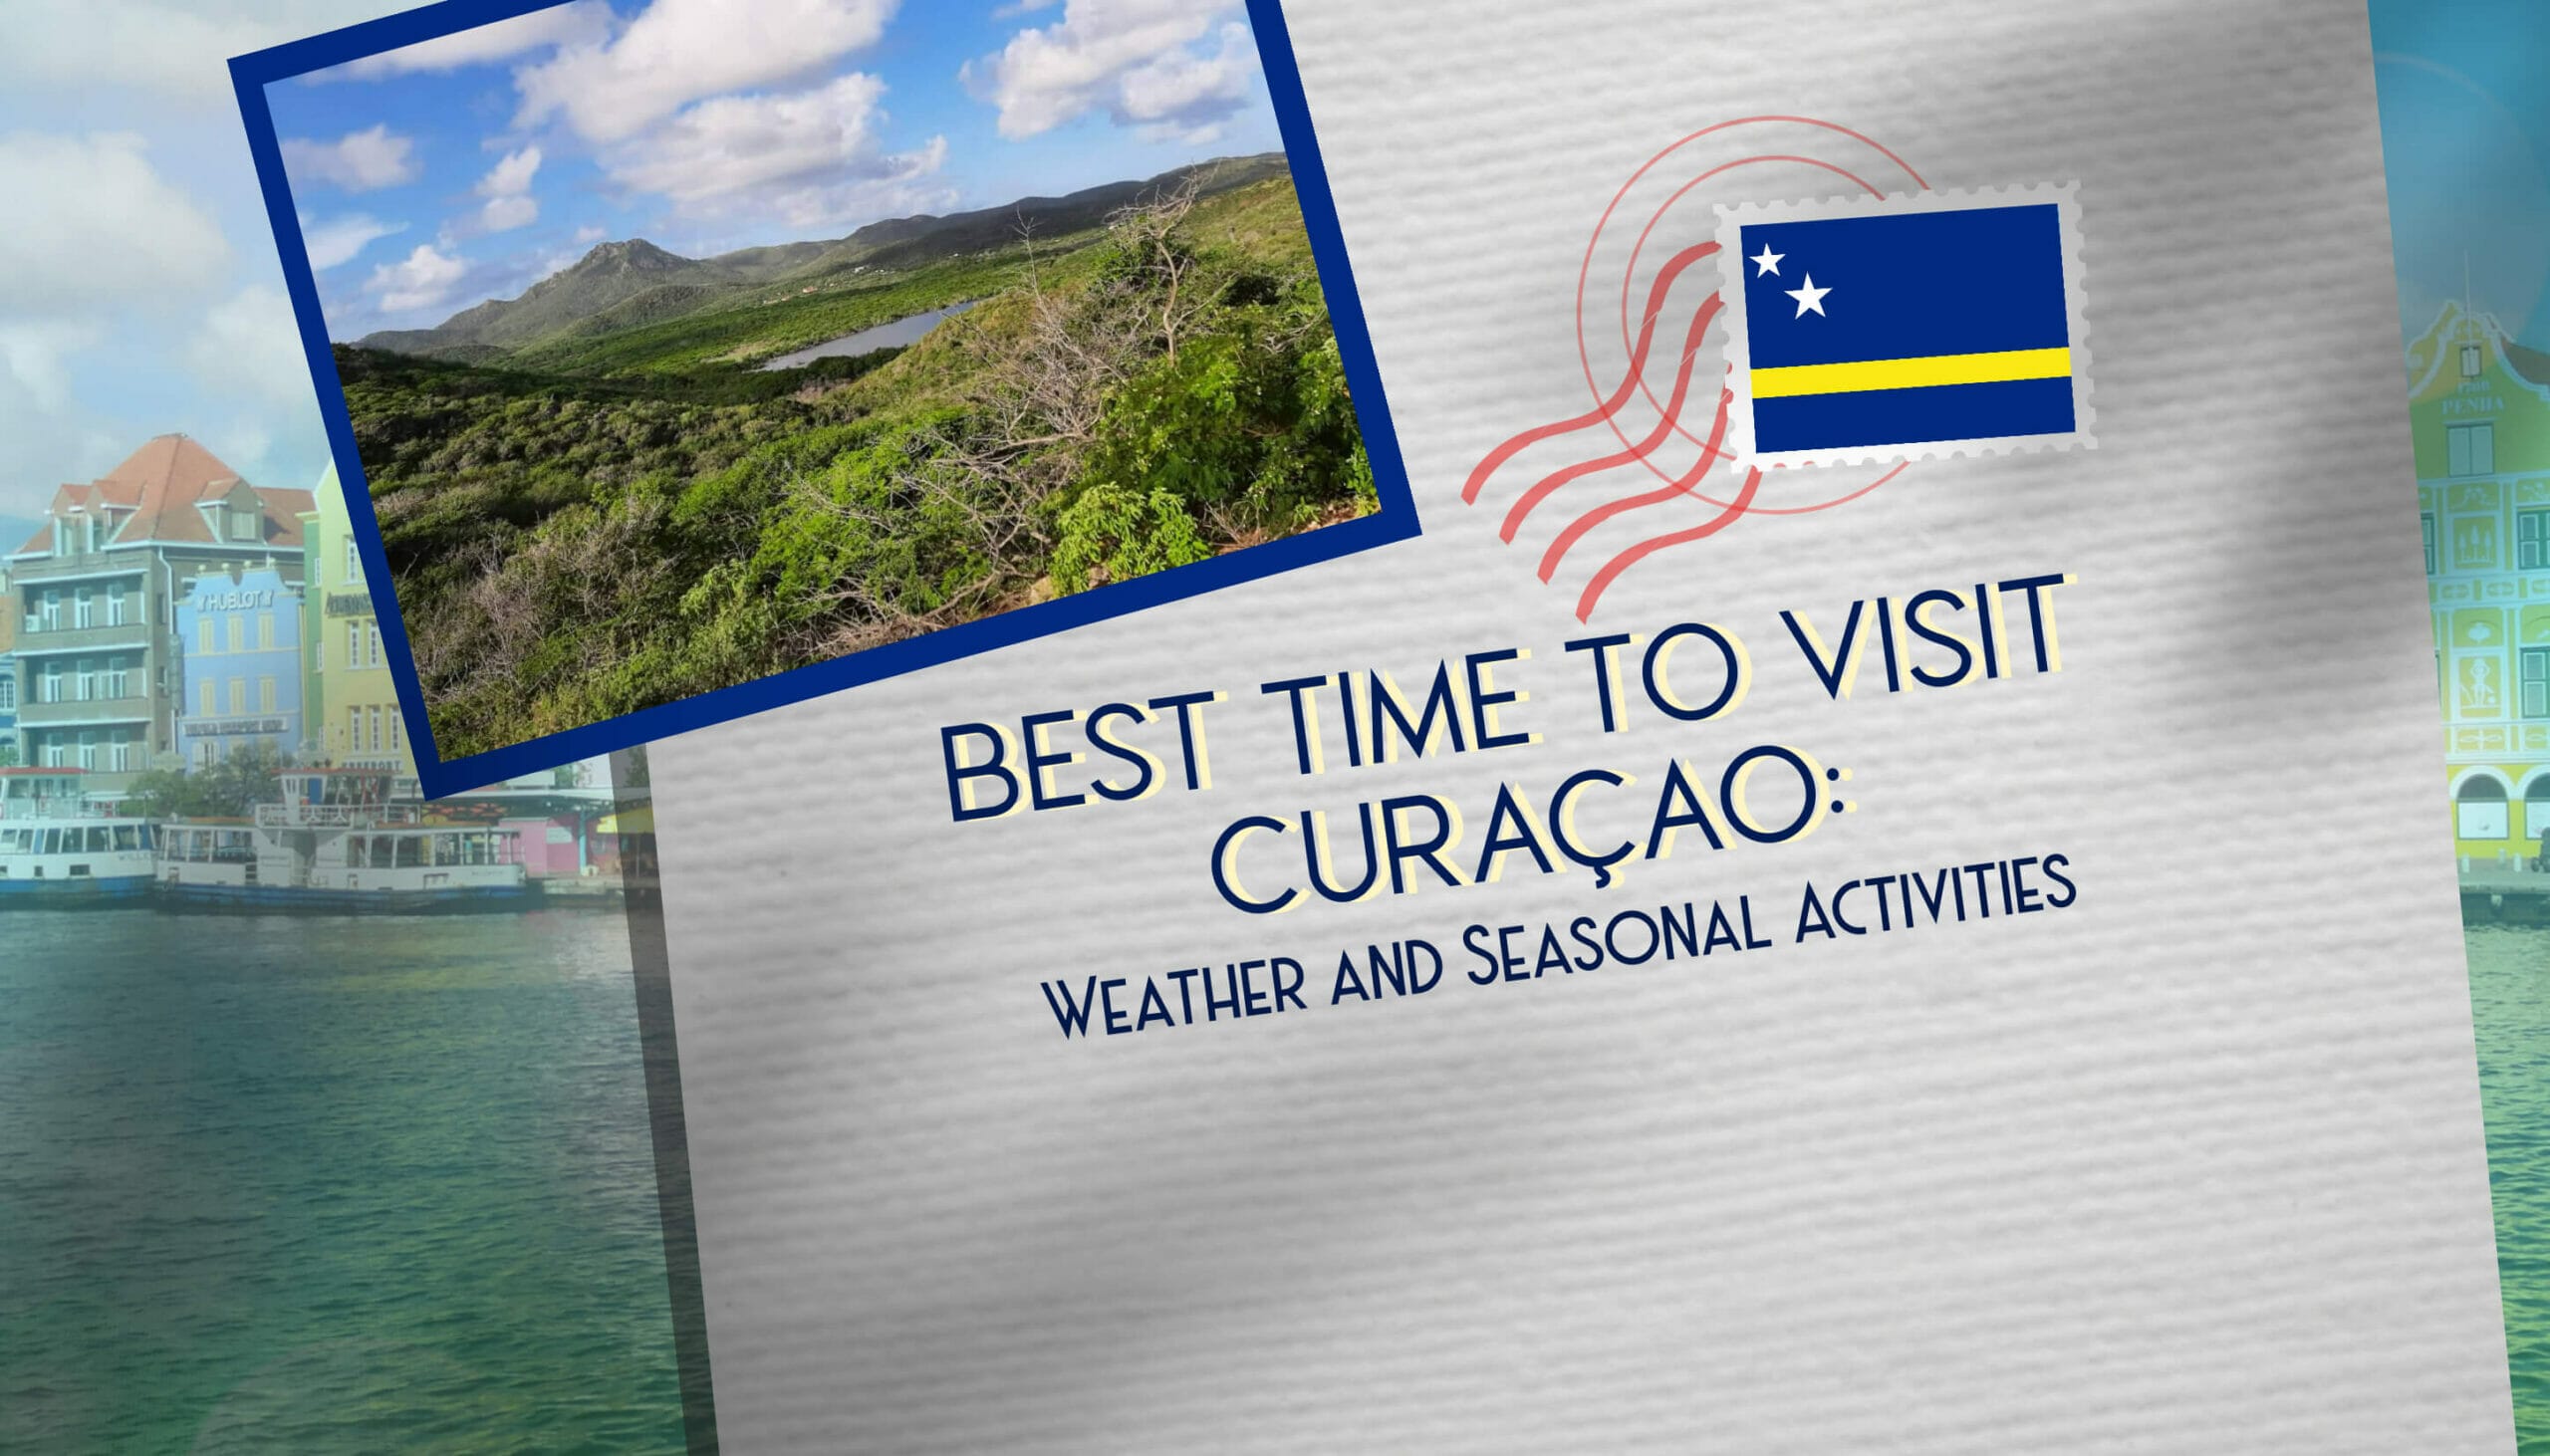 Best Time to Visit Curaçao Weather and Seasonal Activities